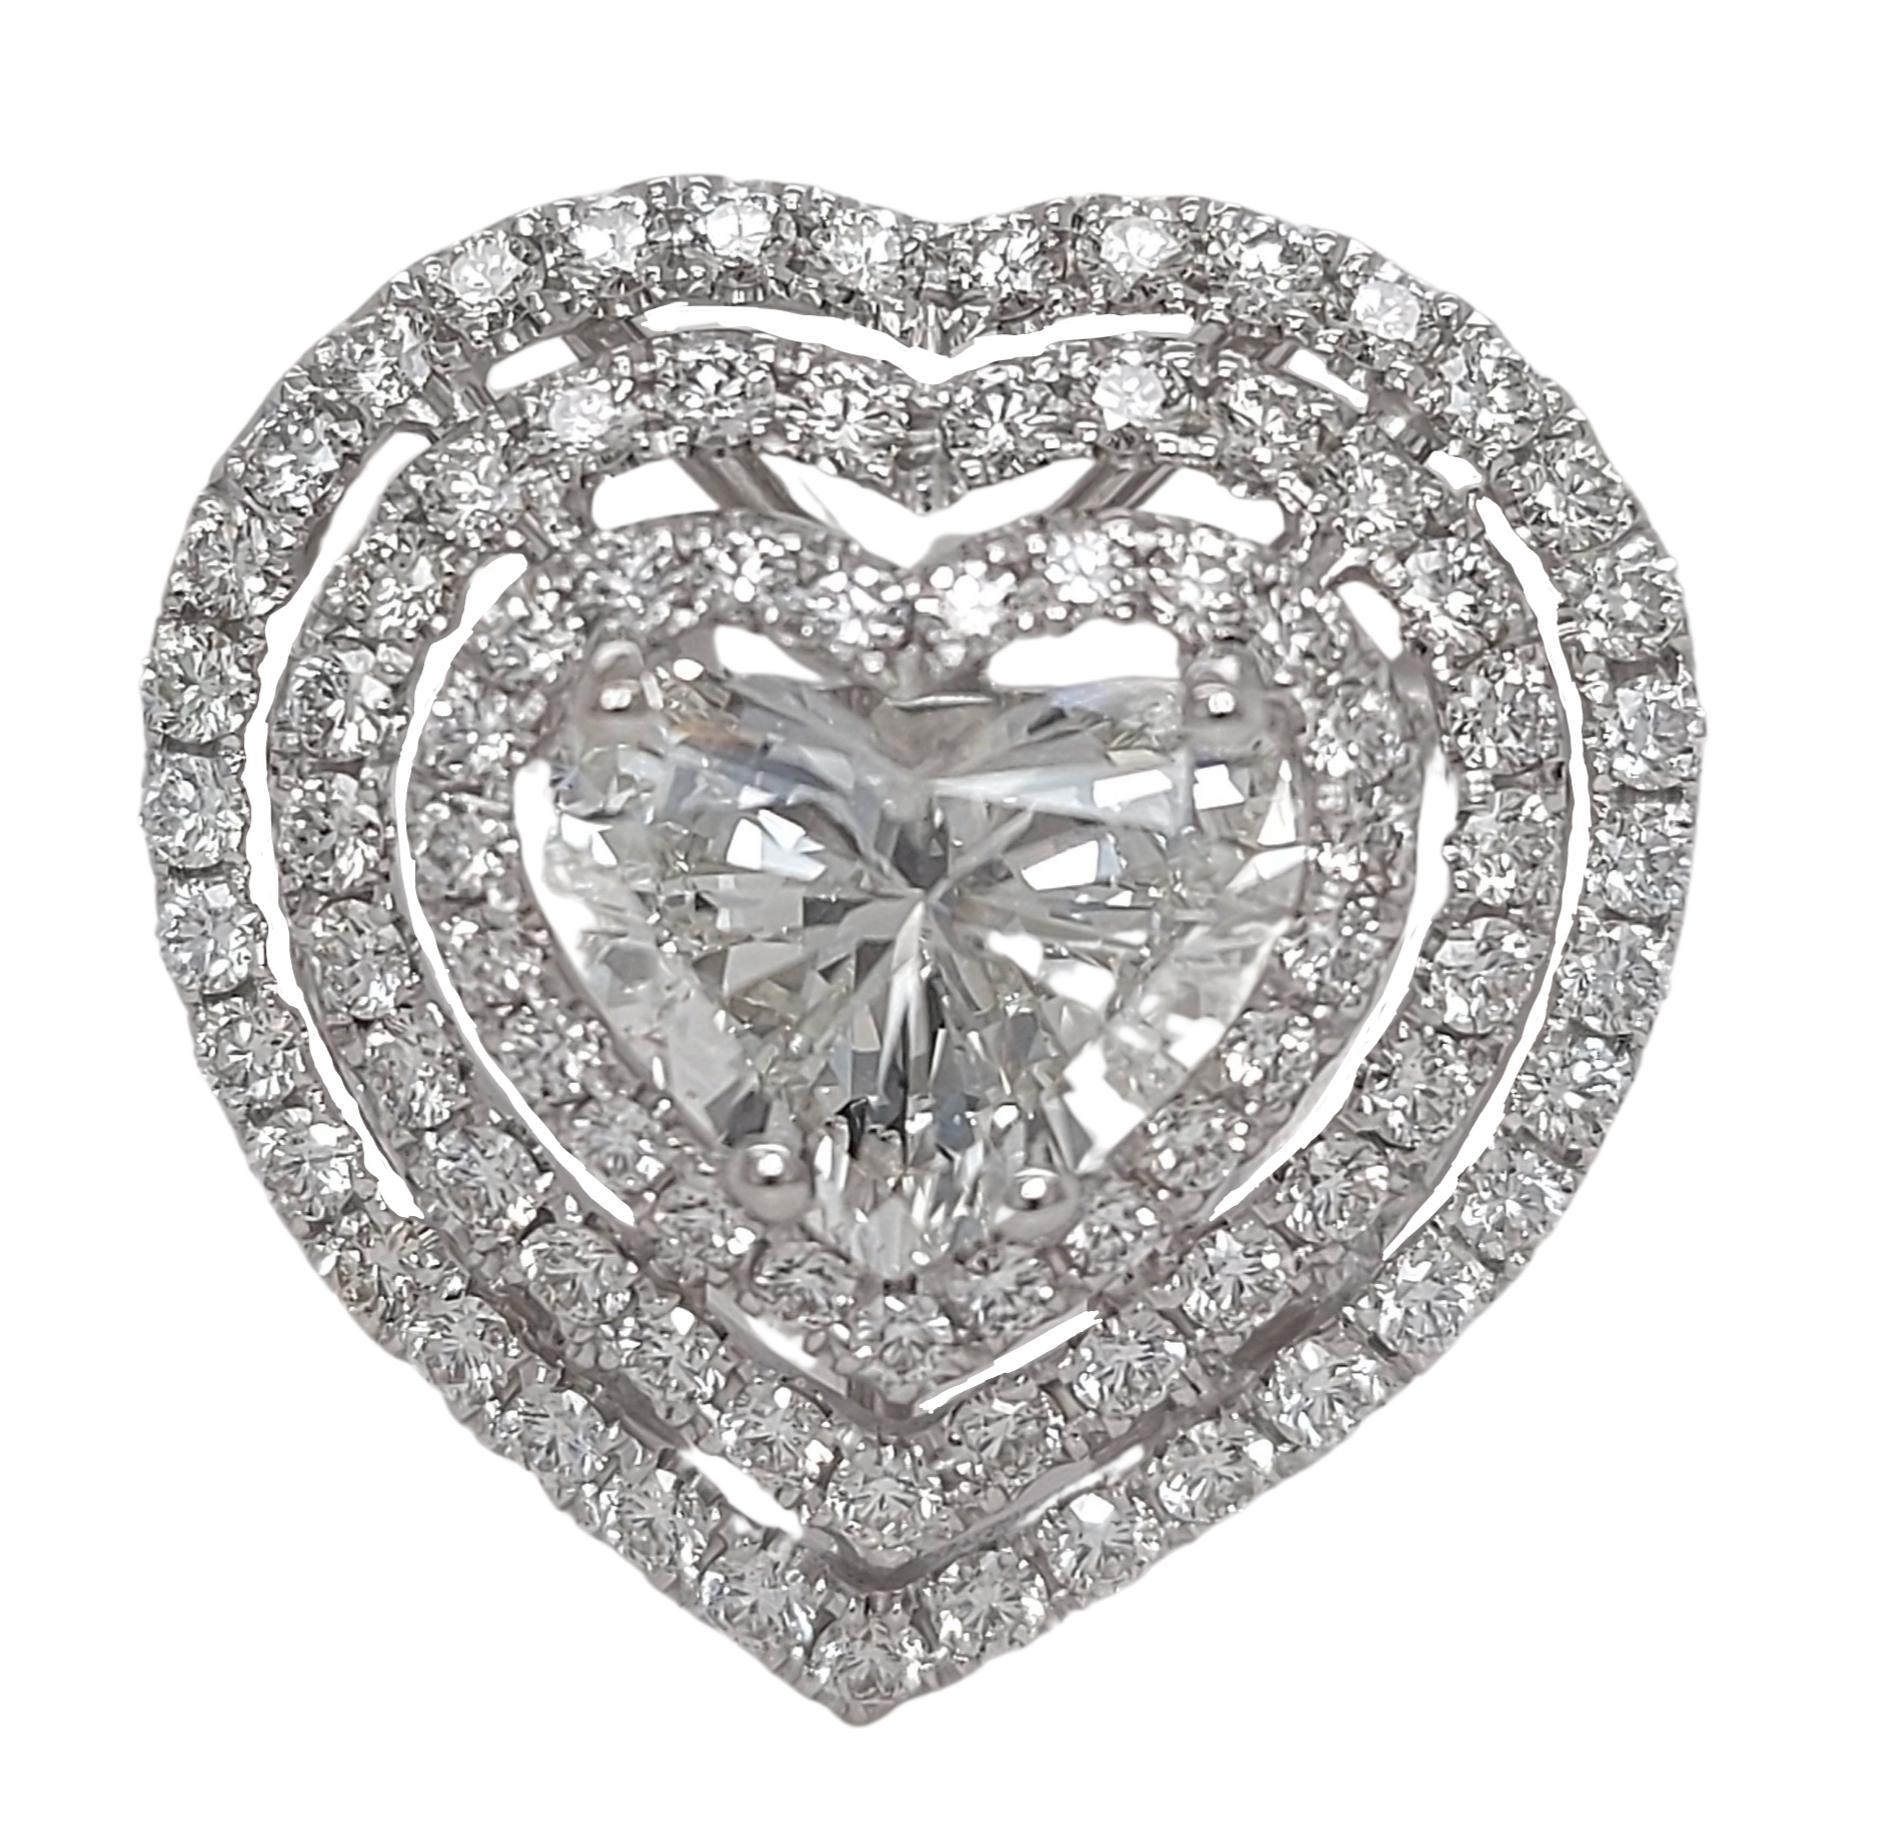 Stunning 18kt Gold Diamond ring with 1.50ct Heart Shaped Diamond & Brilliant Cut Diamonds

Completely Handcrafted In our Atelier.

Diamond: Heart shaped diamond approx. 1,50ct G SI, surrounded by brilliant cut diamonds together approx.